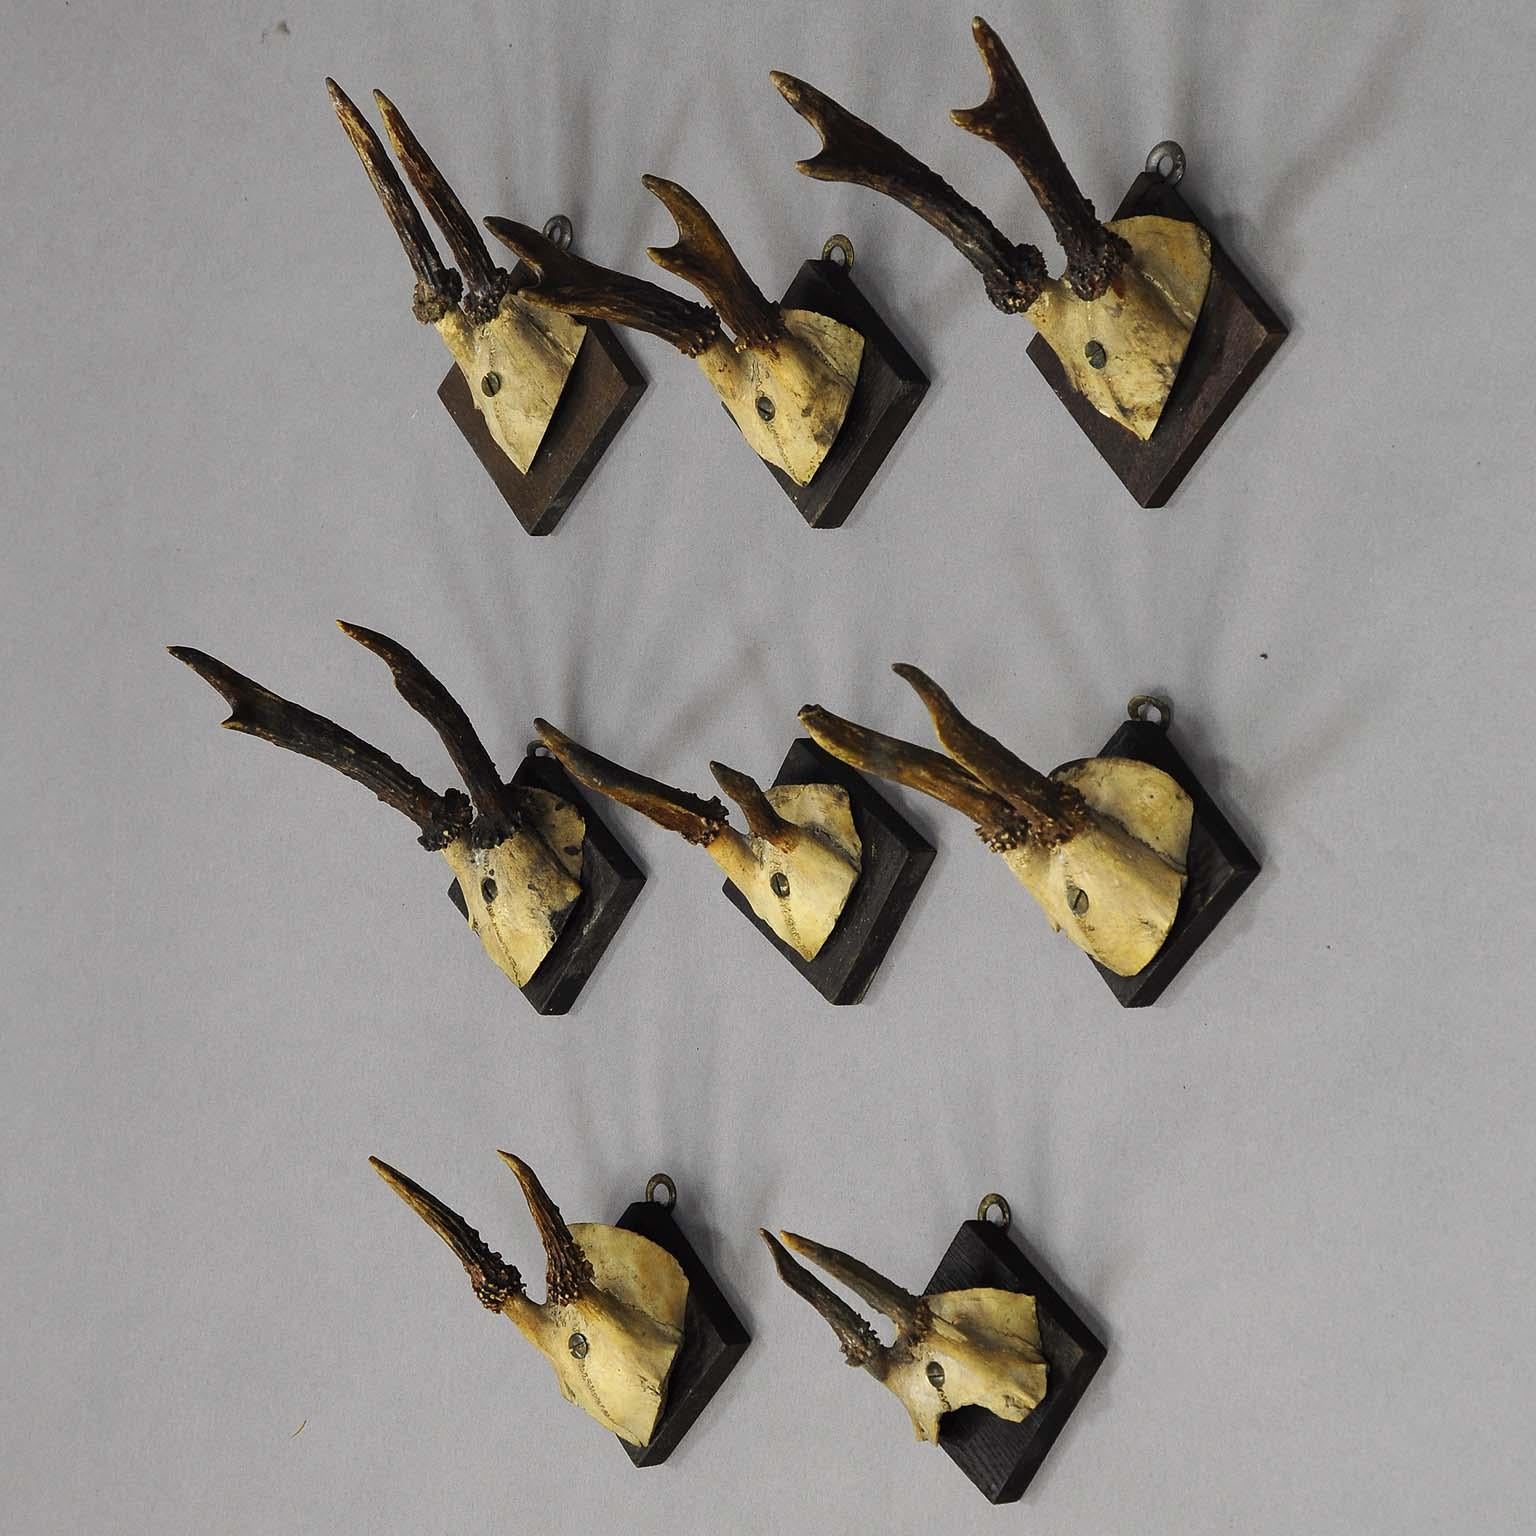 A set of eight antique Black Forest deer trophies from the one year old deer. Mounted on square cutted and stained wooden plaques. Bavaria, circa 1900.

Measures: Length 2.95